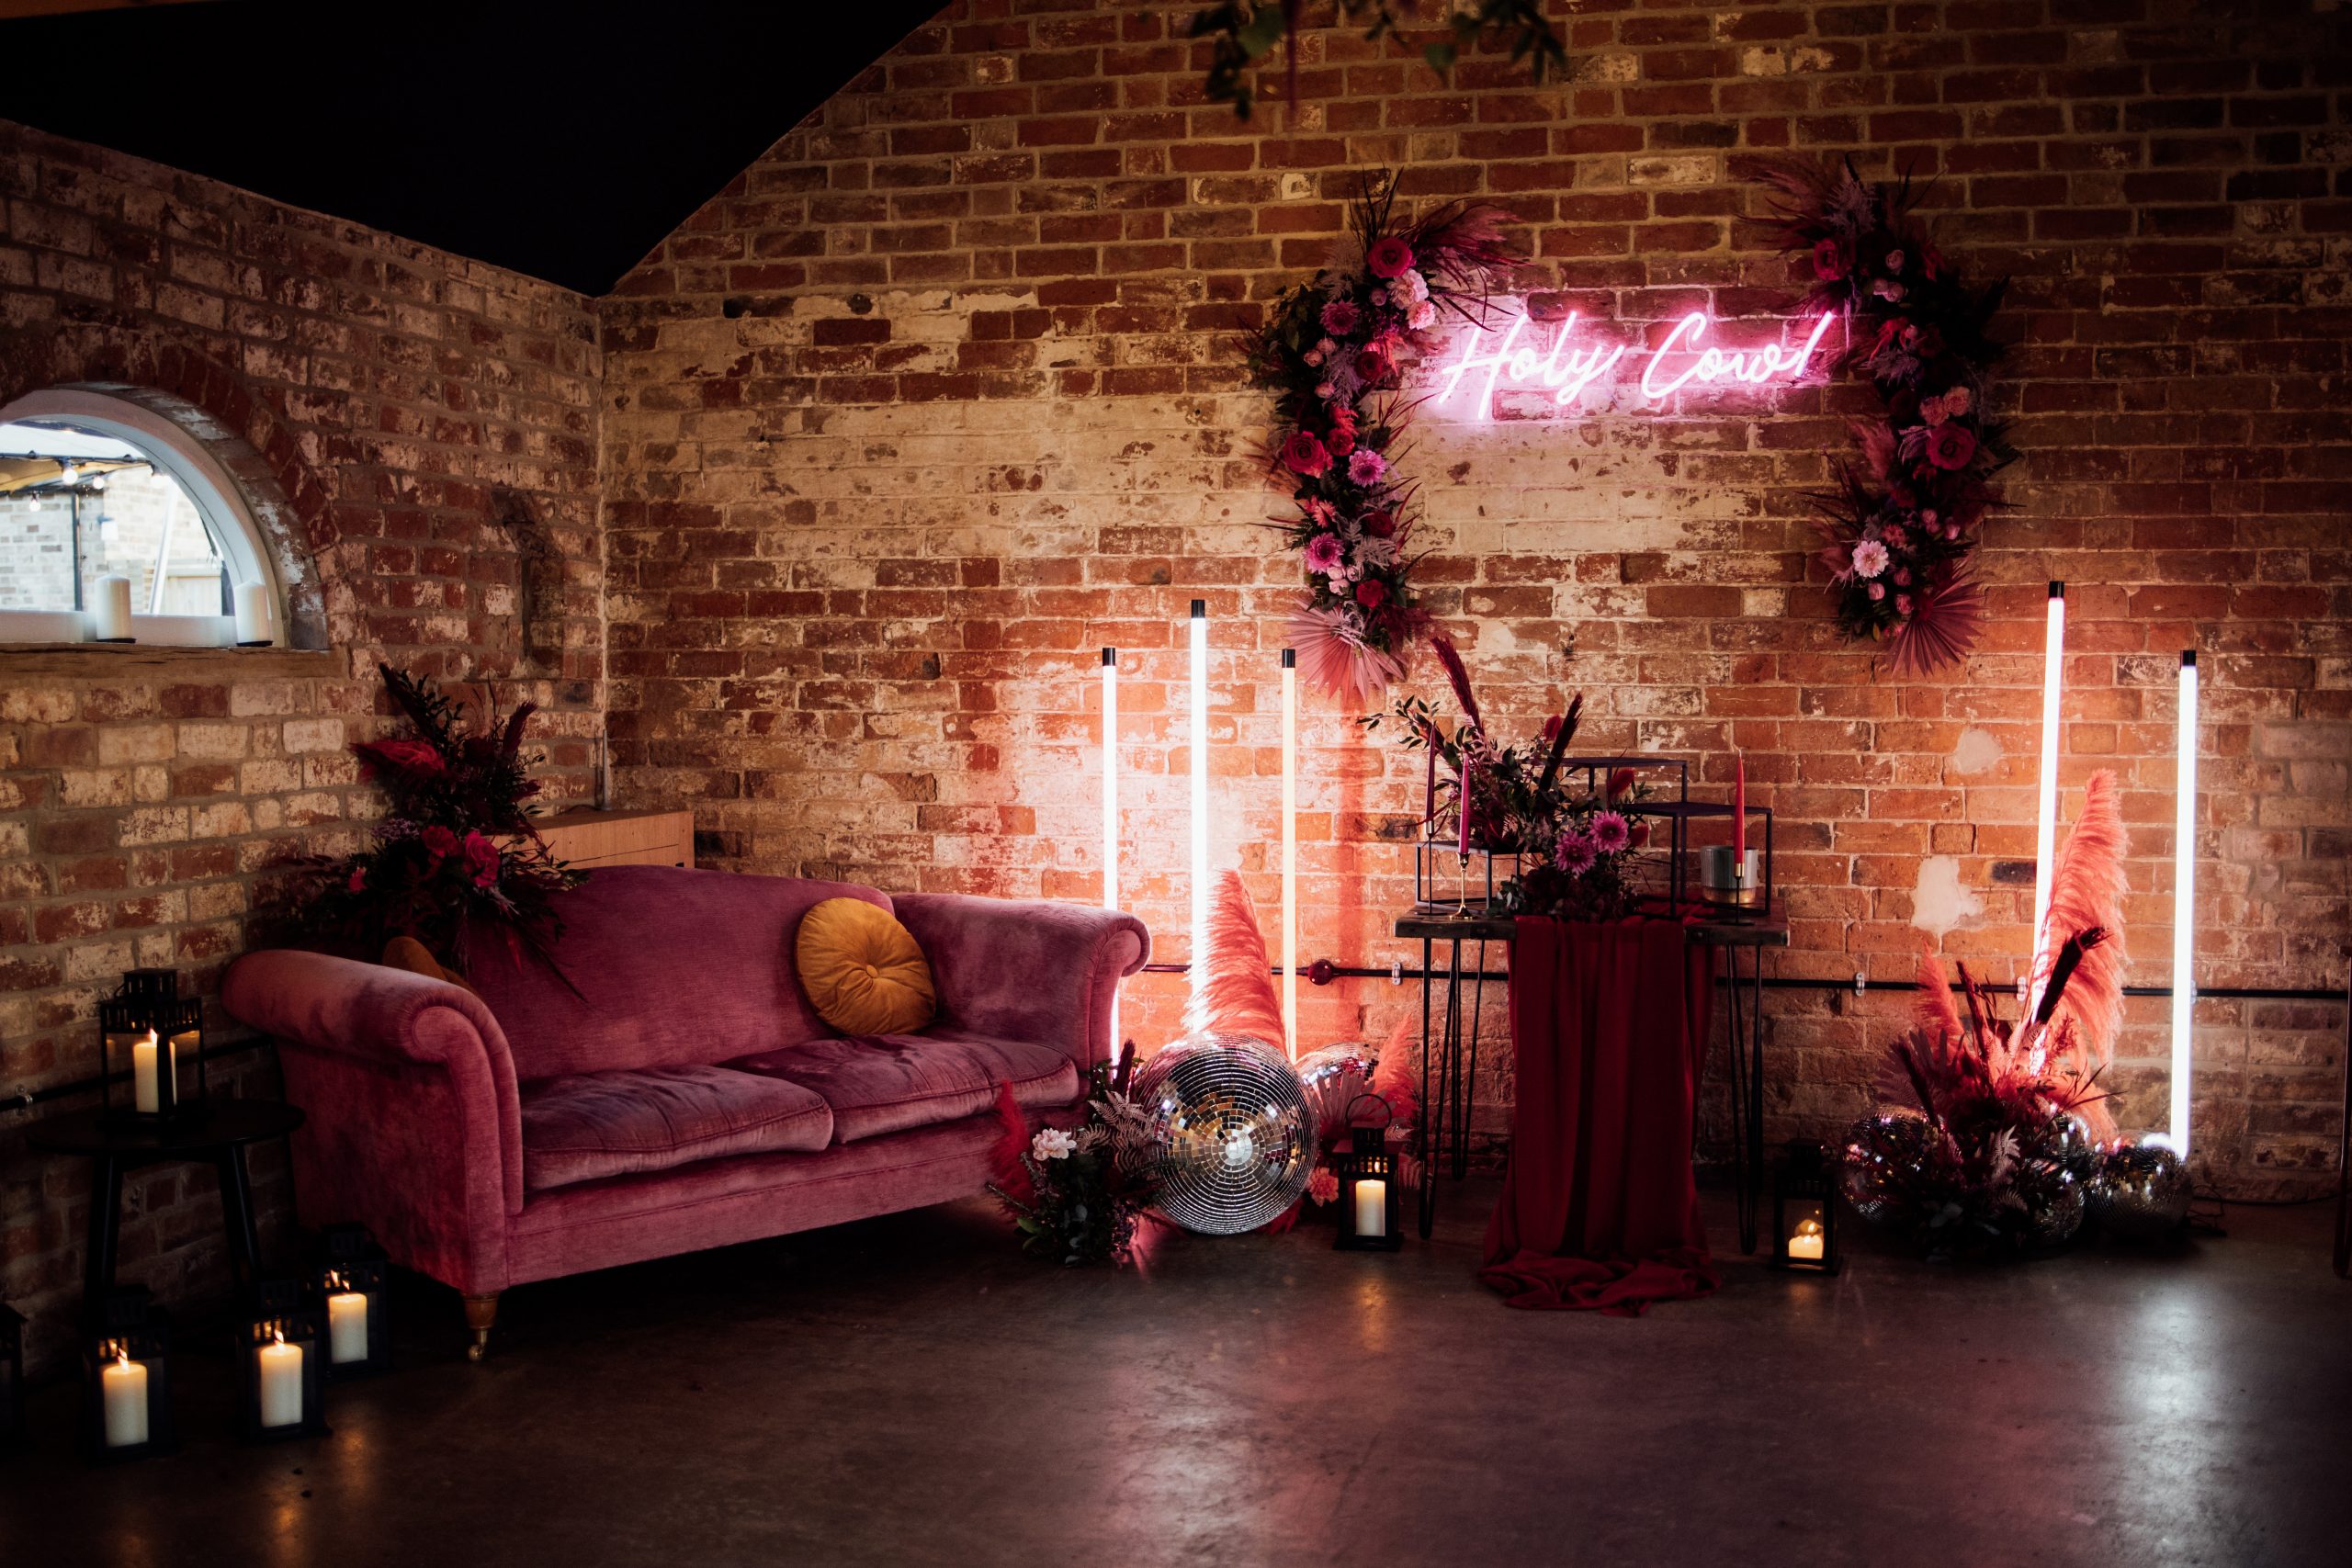 the old cow shed barn filled with pink sofa, floral backdrop and holy cow pink neon. With disco balls and flowers on the floor